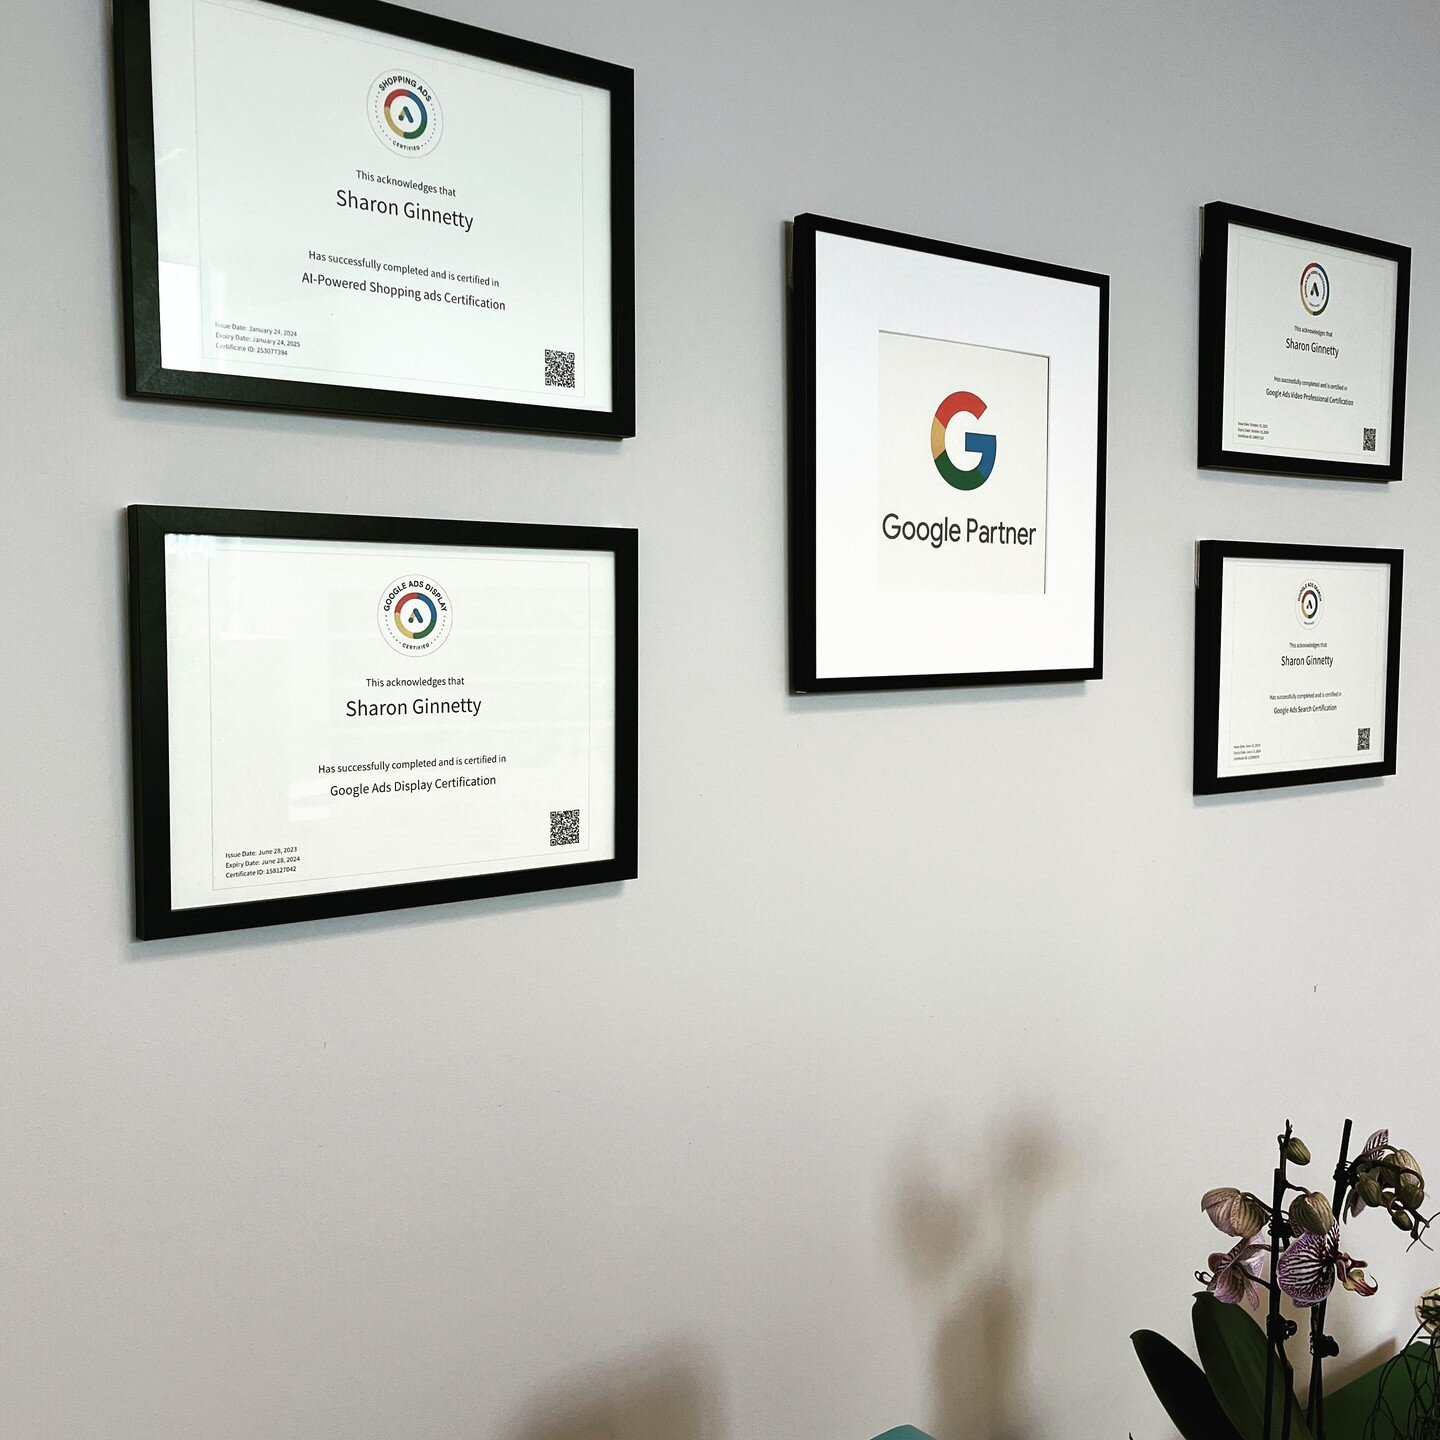 Celebrating the little wins in January! I had to renew my Shopping Ads Certification and passed the exams last week. It was the impetus needed to finally get some of those certs on the office wall! 📜

#googlepartner #googleads #ppc #growingrevenueon